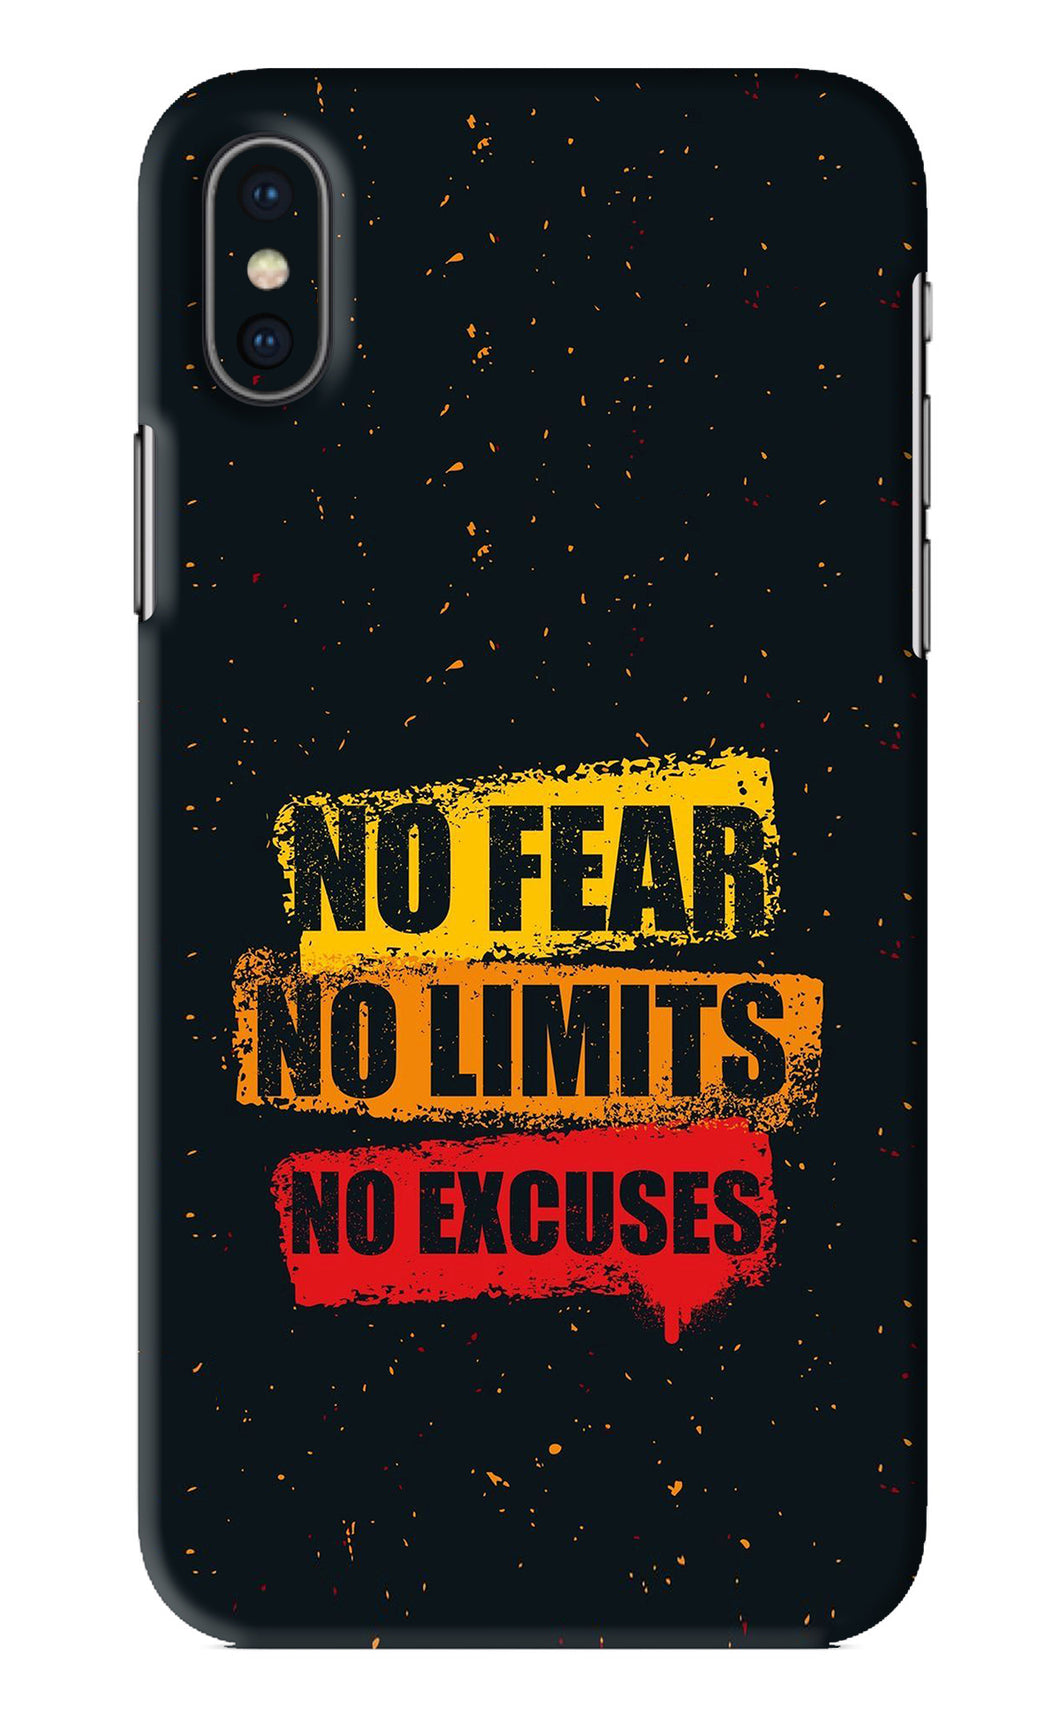 No Fear No Limits No Excuses iPhone X Back Skin Wrap